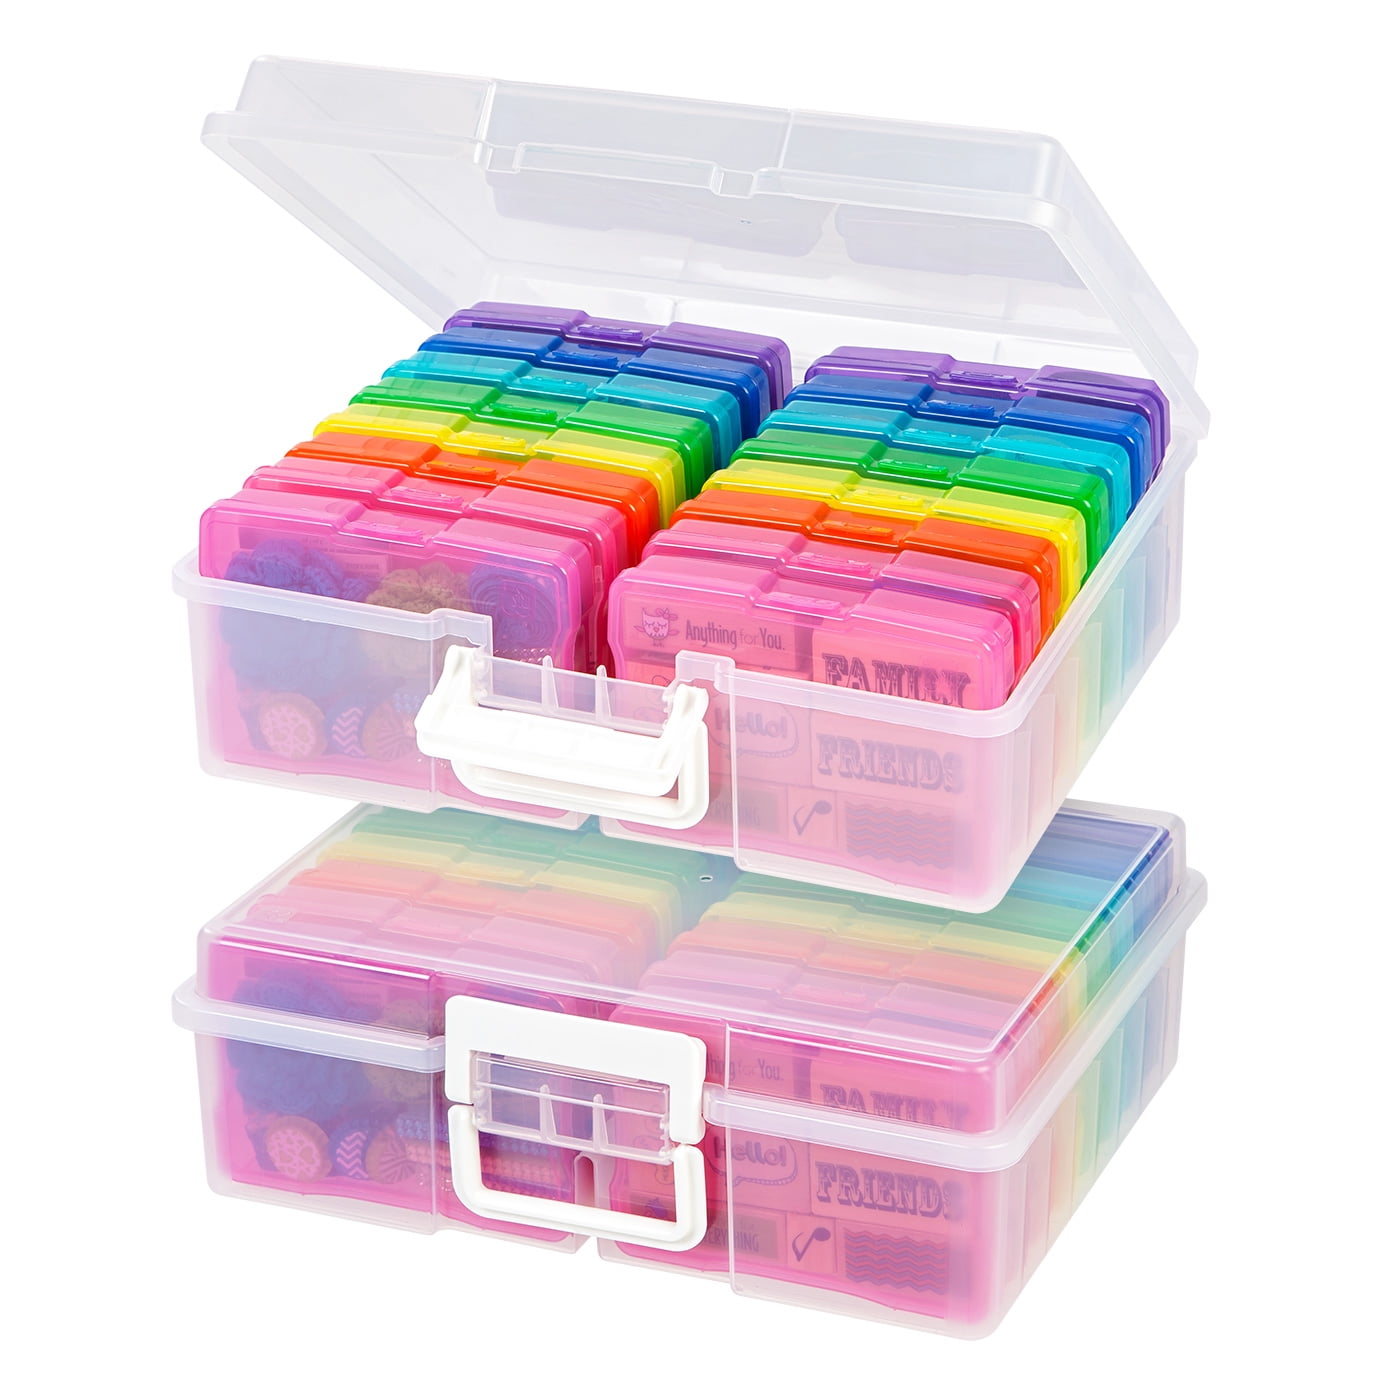 585160 10 Pack Clear IRIS 4 x 6 Photo Storage and Embellishement Craft Case